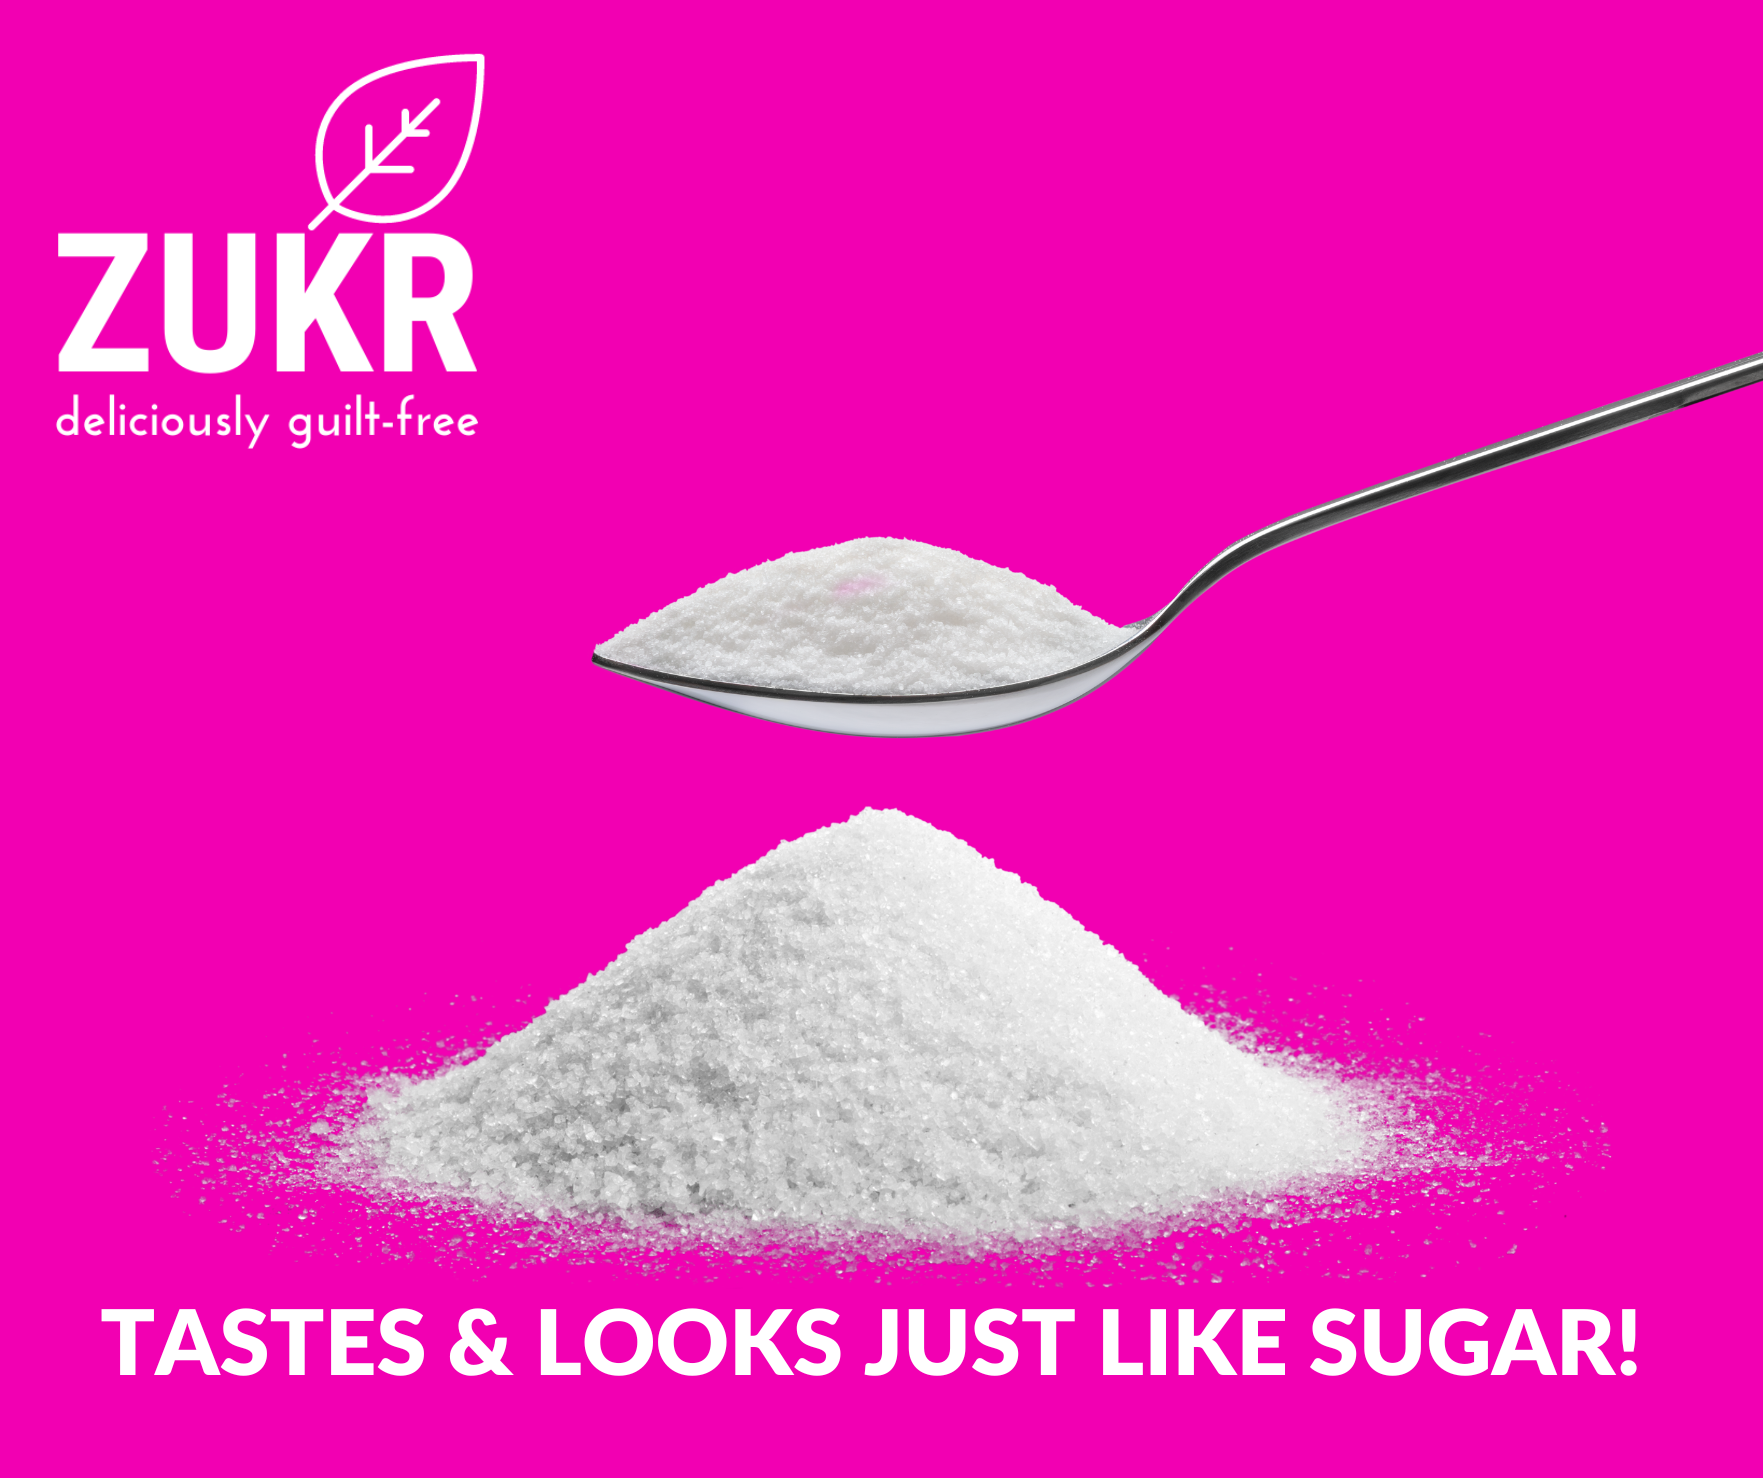 Looks and tastes just like sugar! ZUKR Natural Organic Sugar Replacement, a zero-calorie, zero-GI, keto, vegan, and paleo-friendly sugar substitute, offers guilt-free sweetness for all dietary needs.